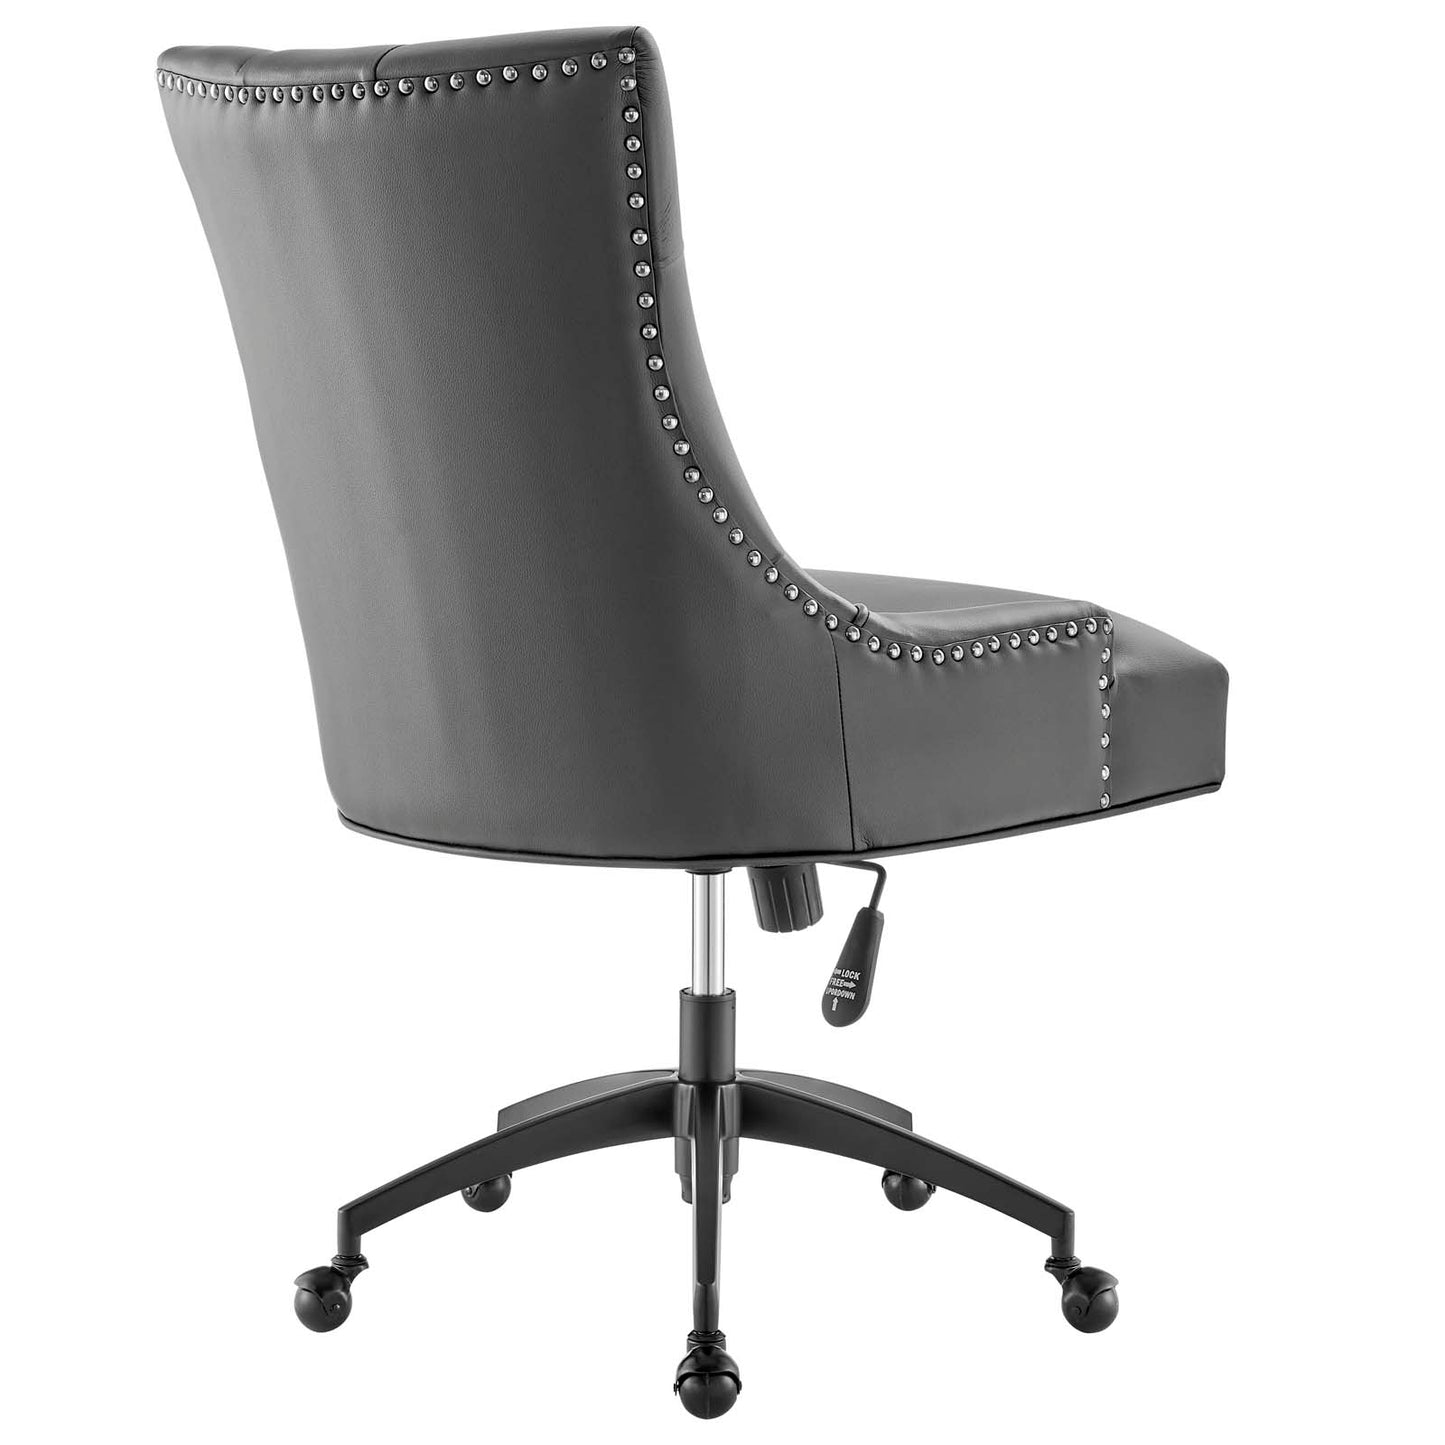 Regent Tufted Vegan Leather Office Chair Black Gray EEI-4573-BLK-GRY